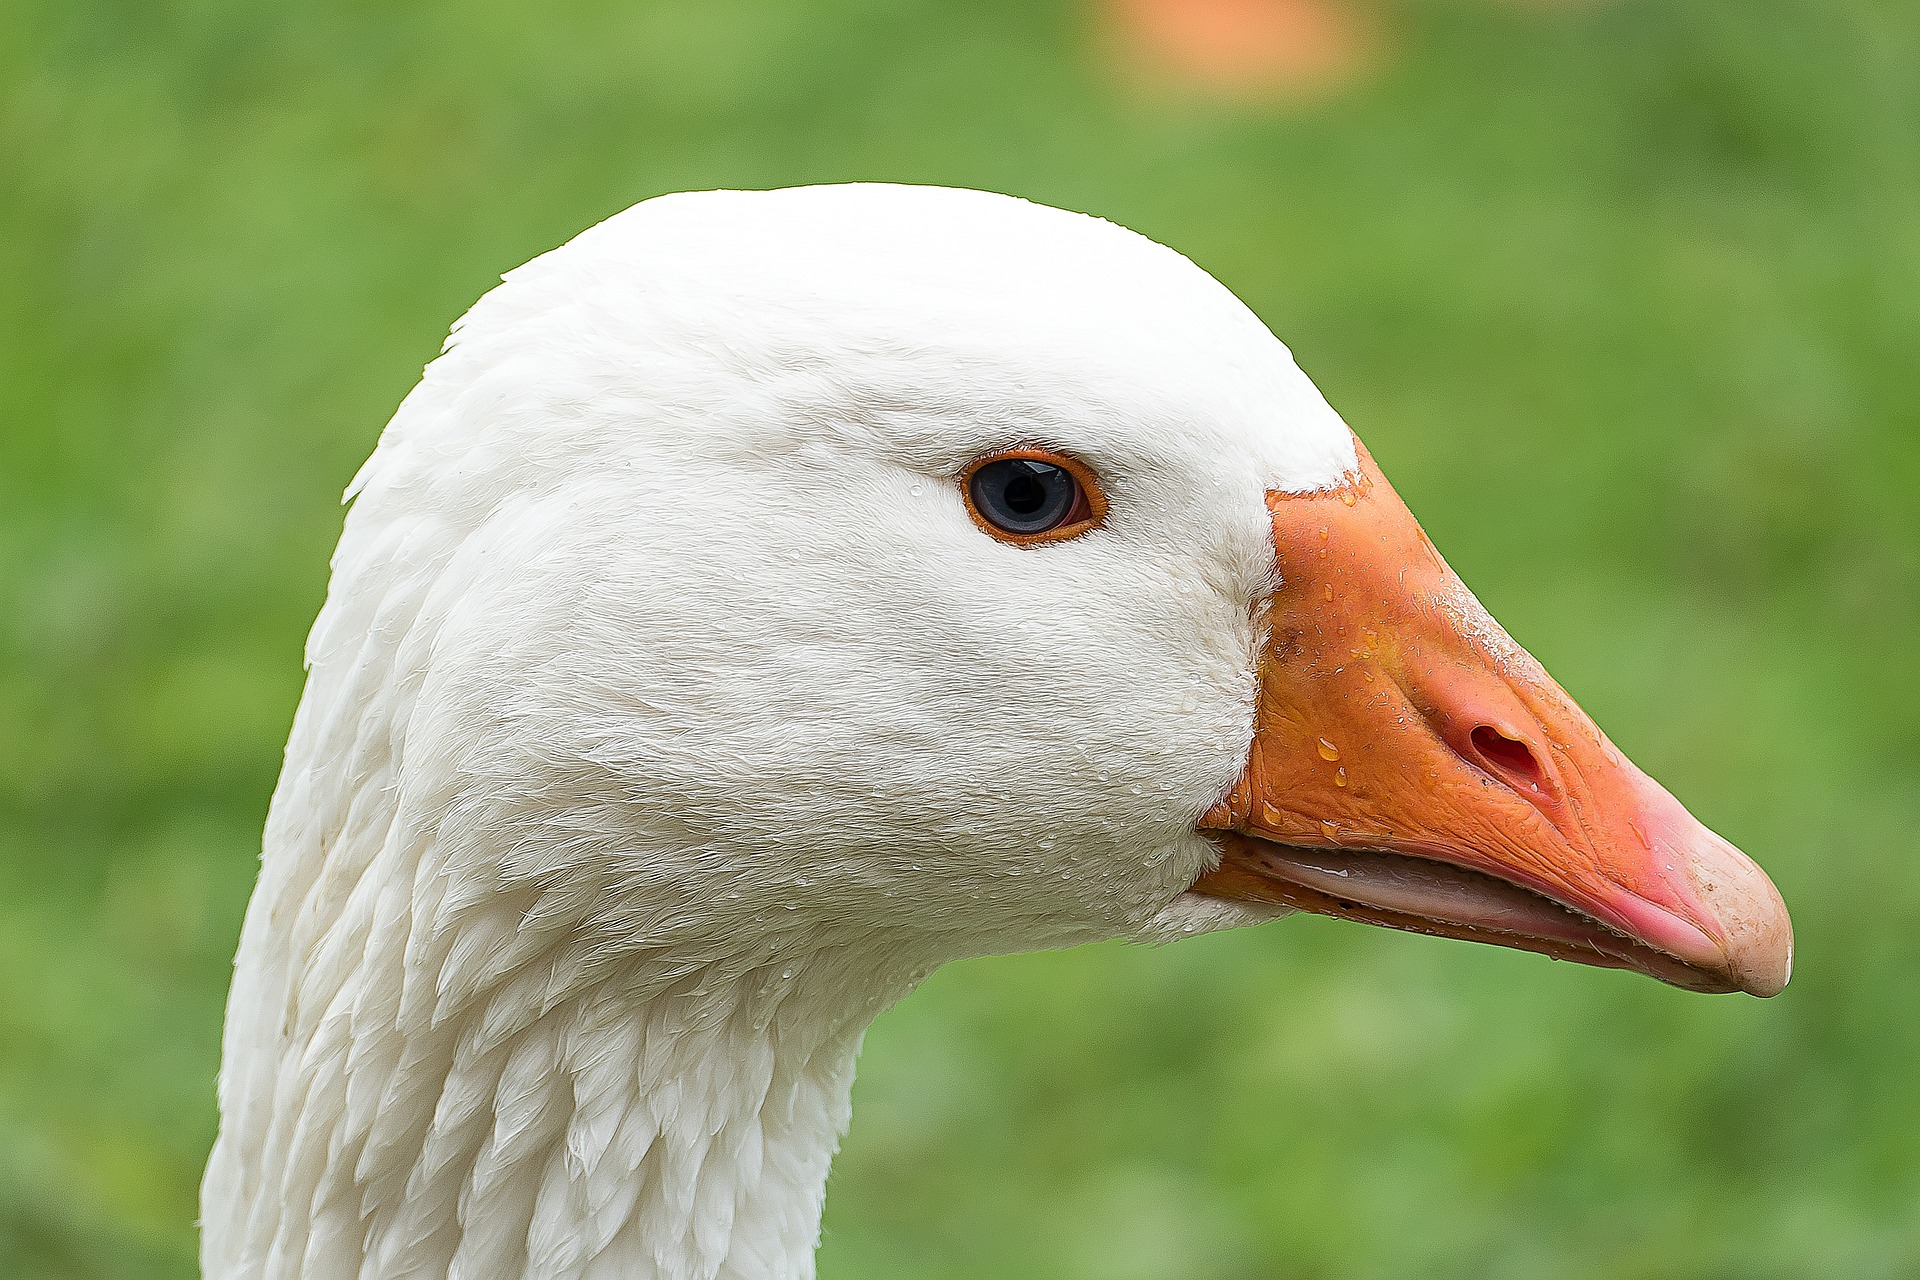 A close-up view of the head of a white goose